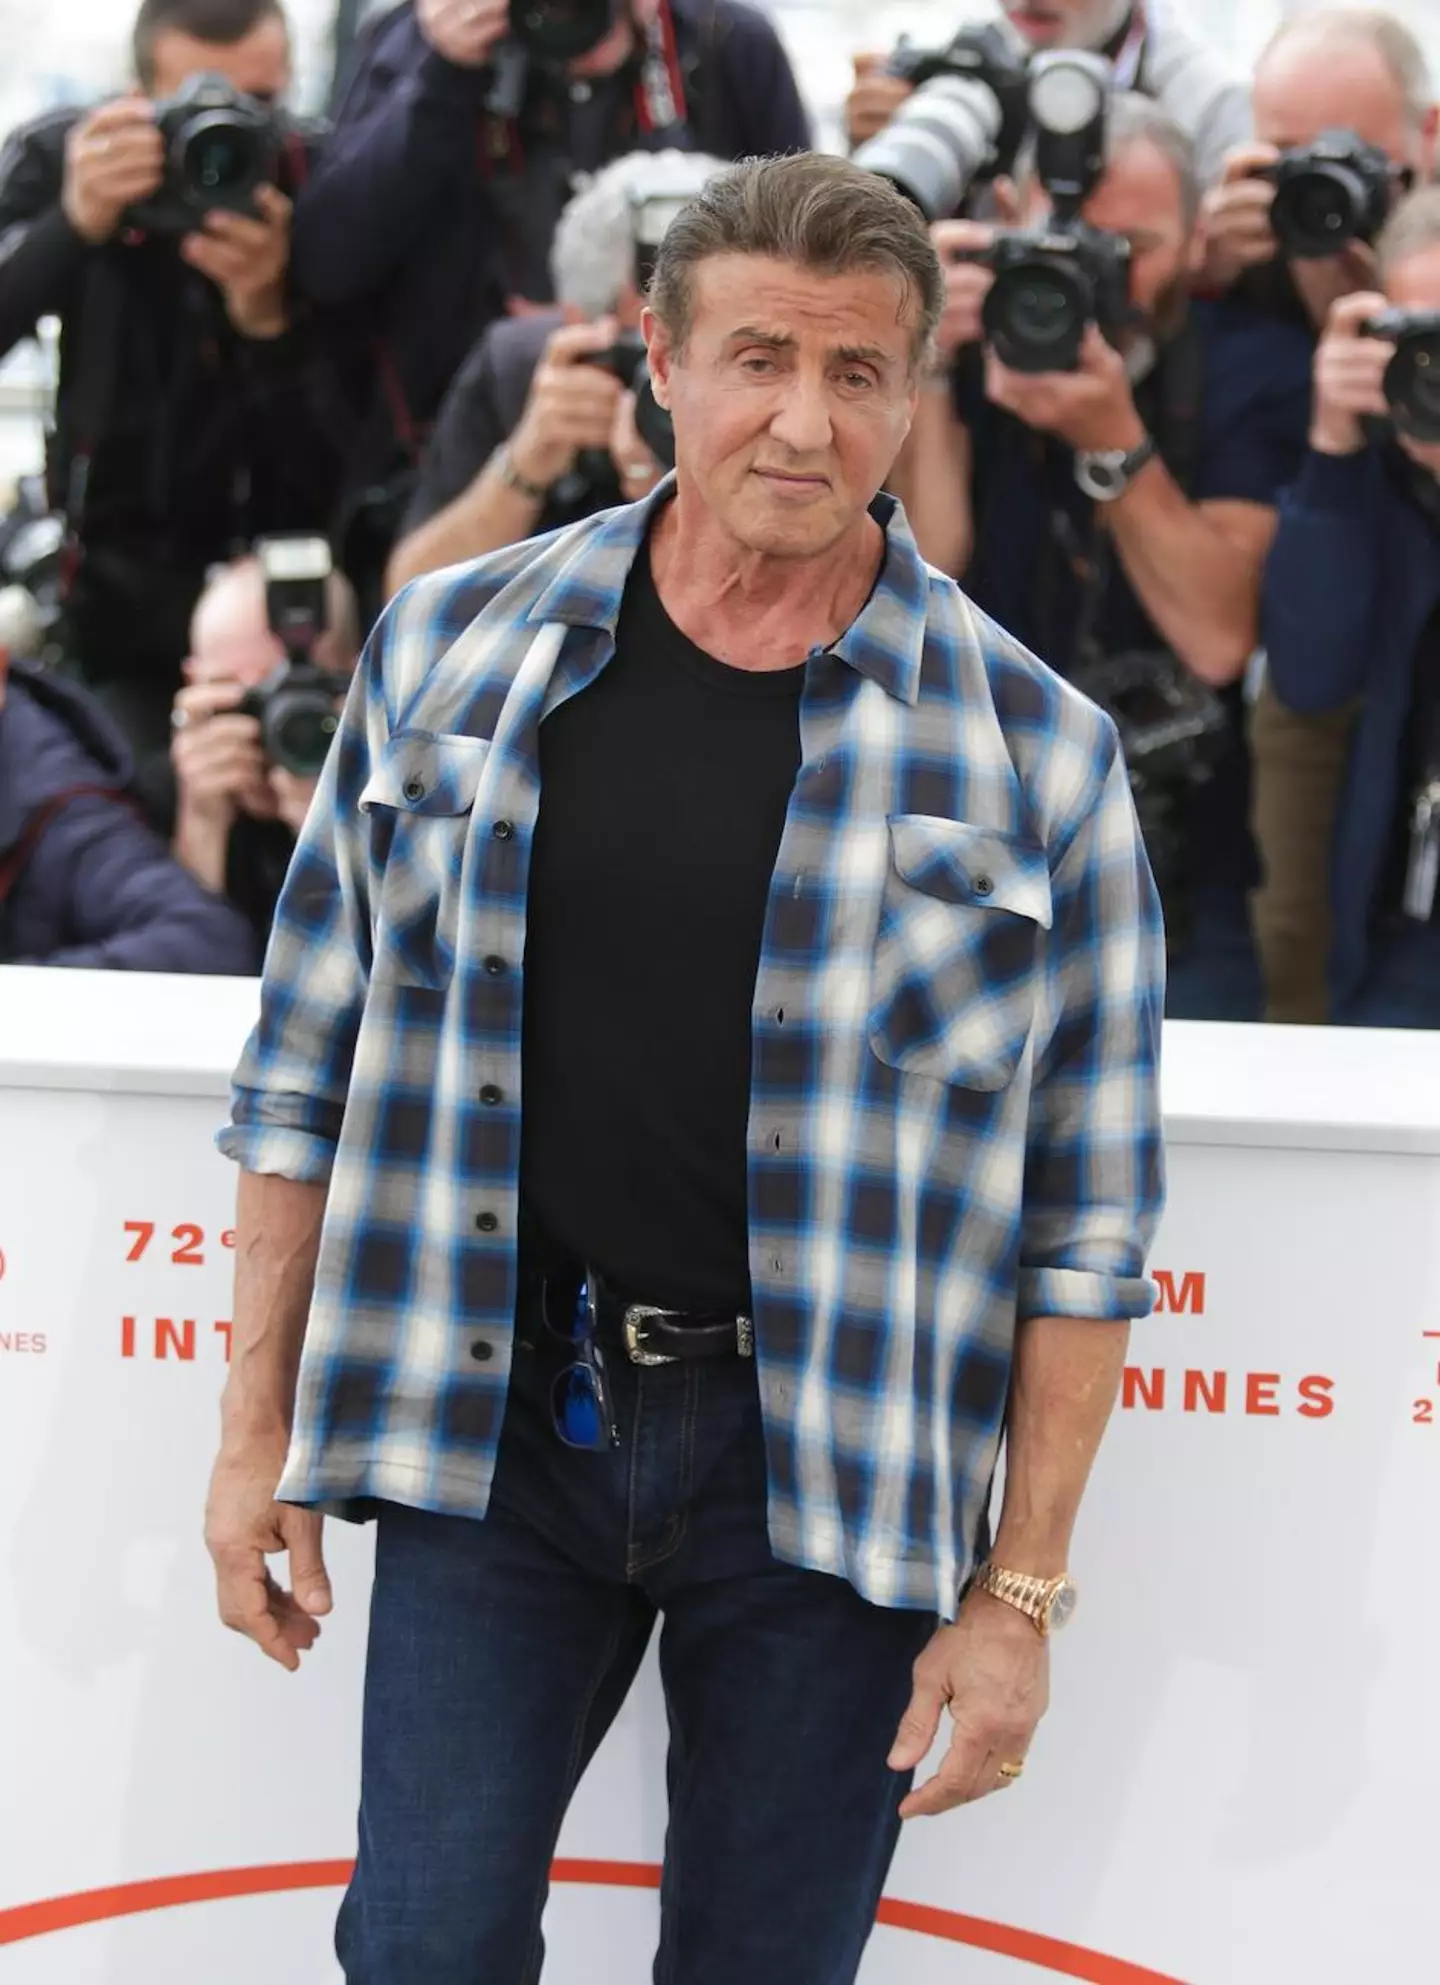 Sylvester Stallone denies the incident ever happened.